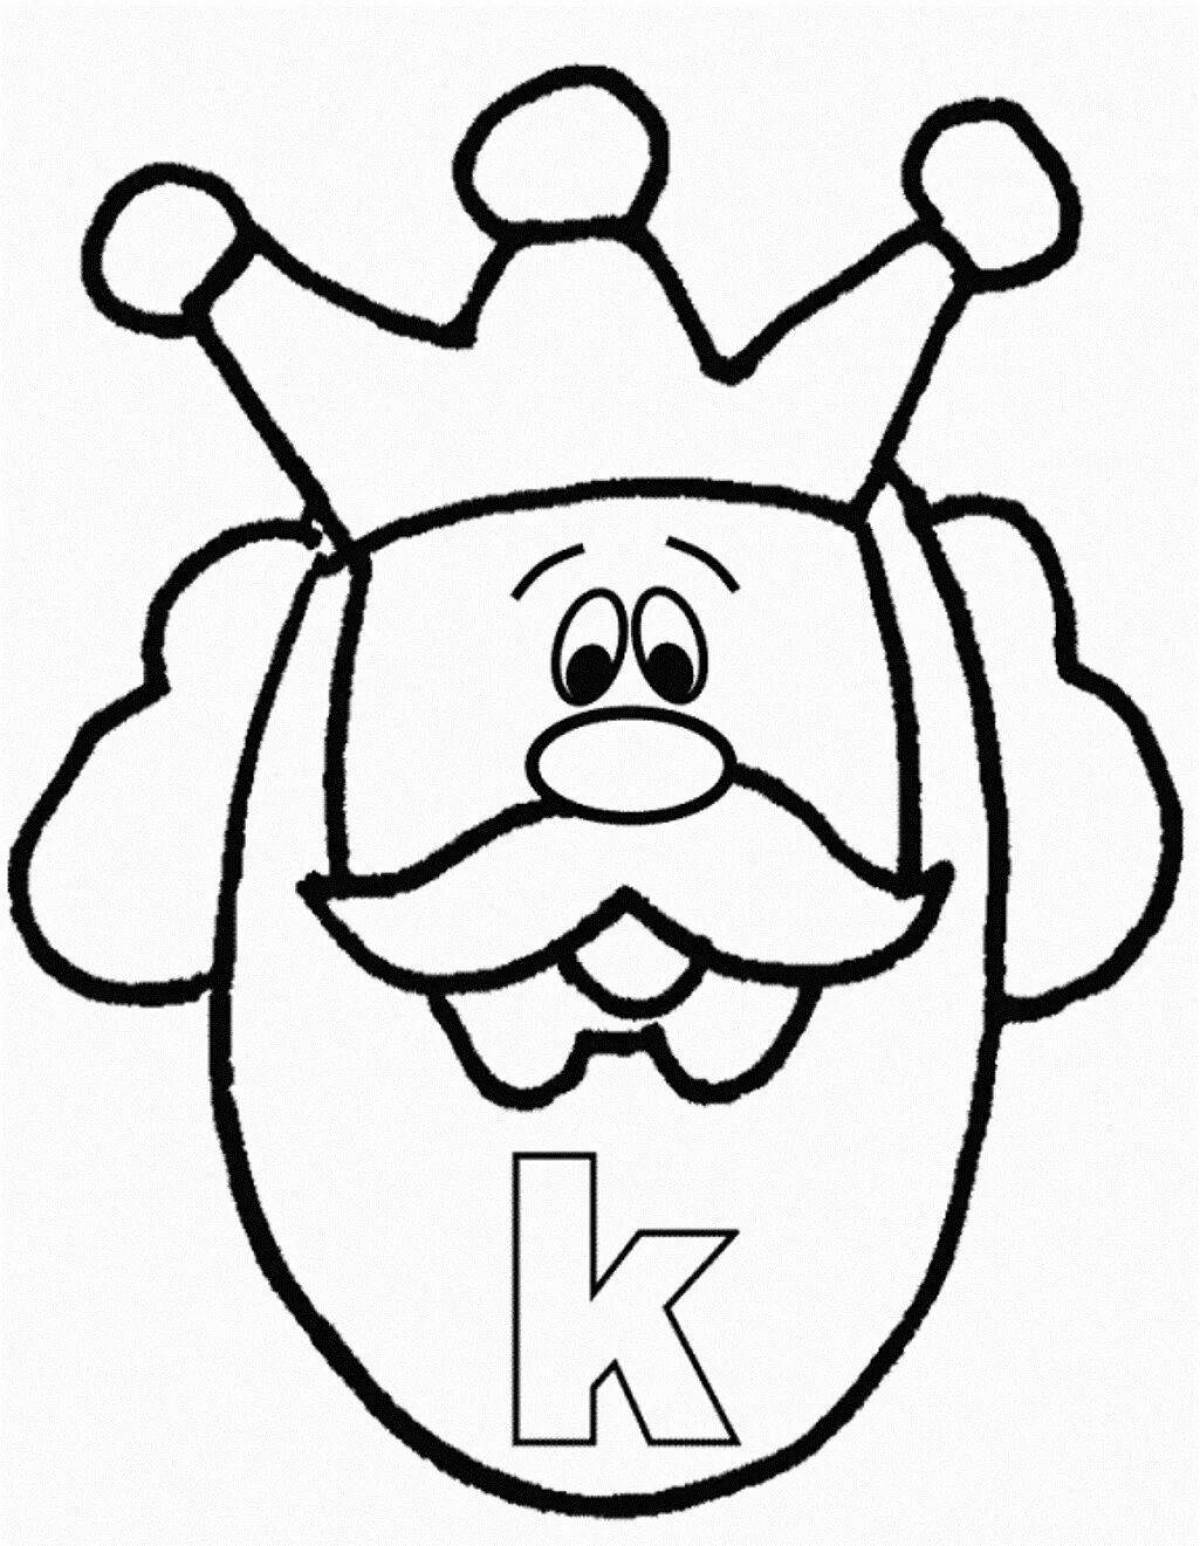 Charming king coloring pages for kids